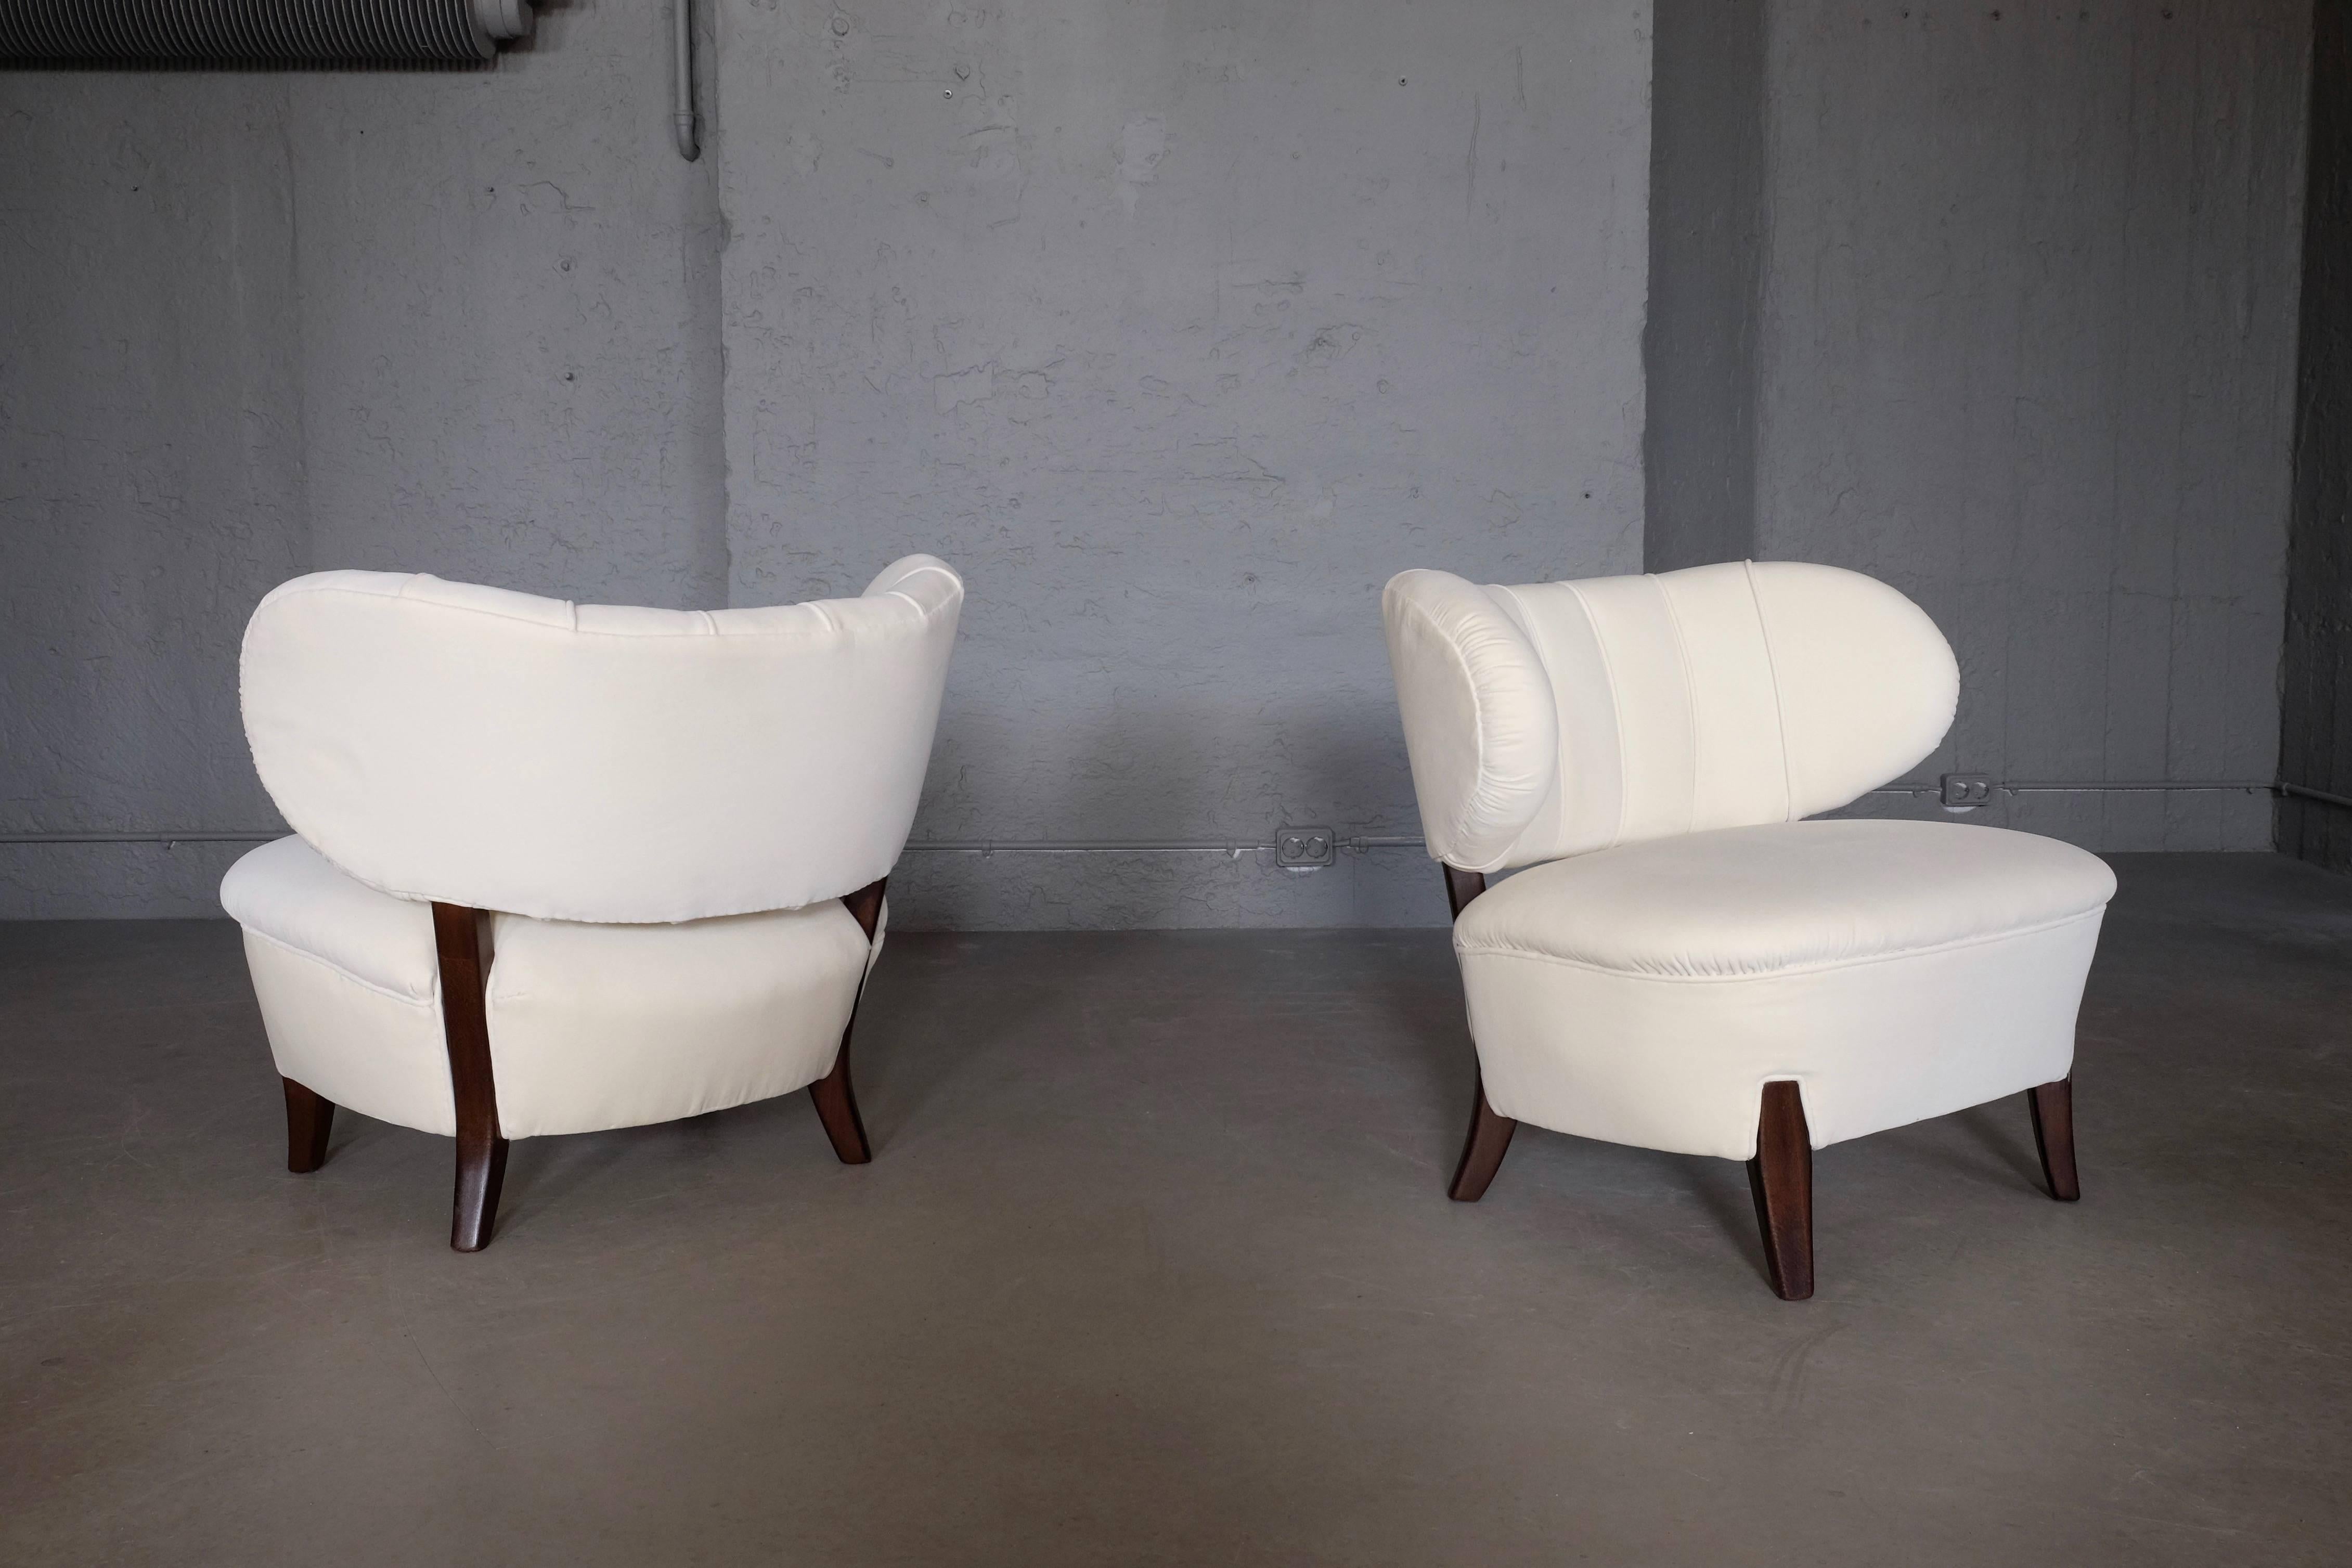 Lovely ivory white velvet easy chairs by Otto Schulz, Boet, Sweden, 1930s.
Reupholstred and restored, excellent condition.
Global shipping: USD 499.
    